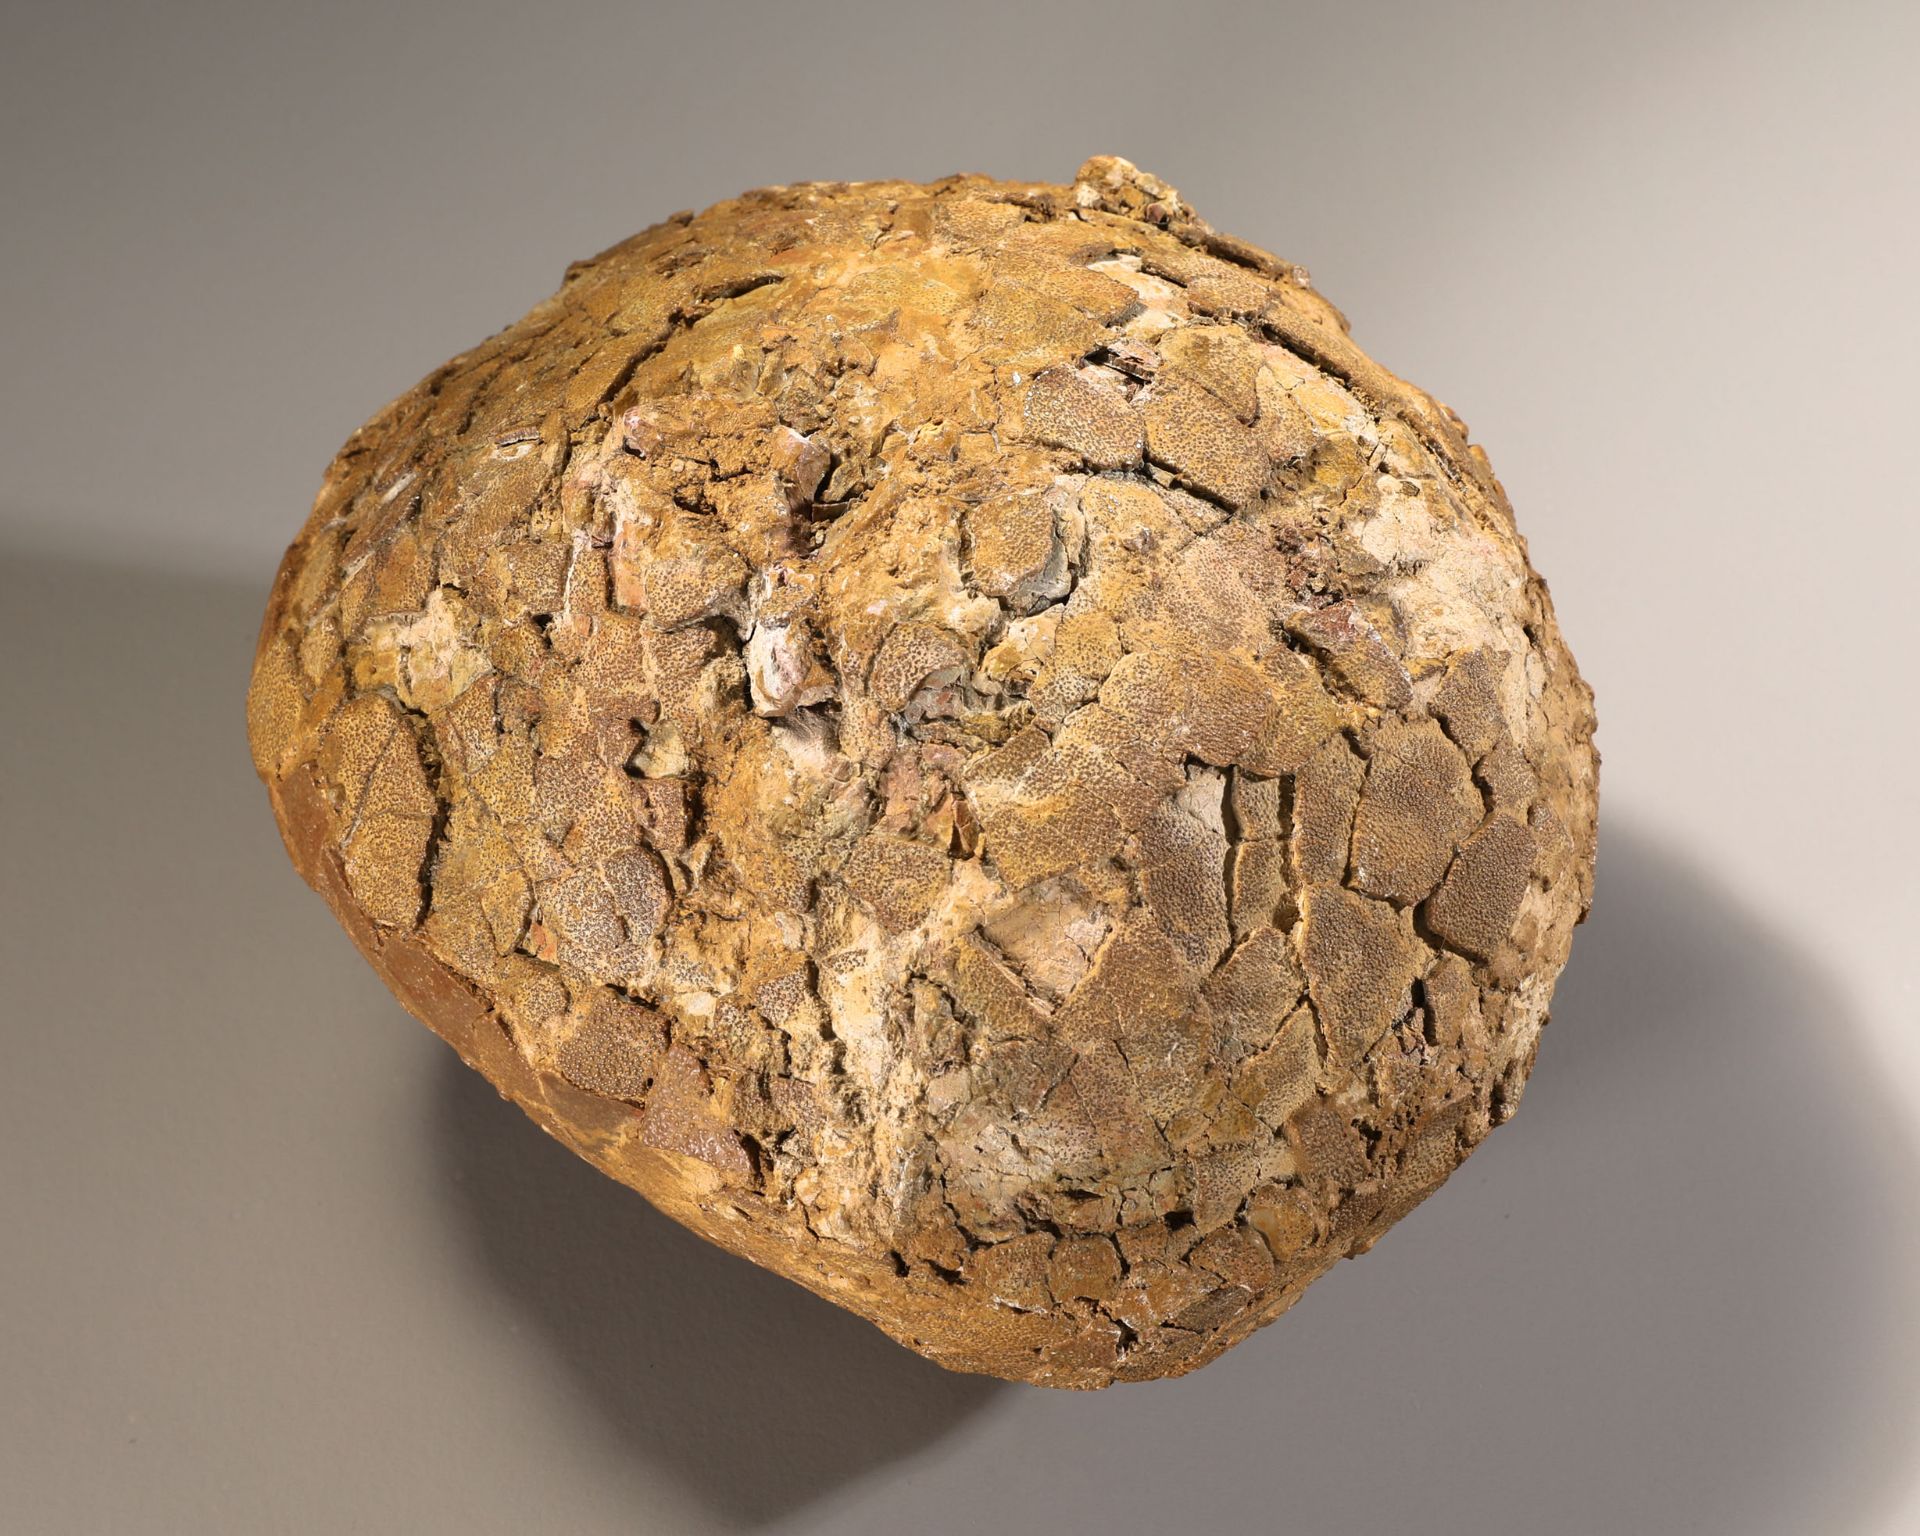 Fossilized dinosaur egg attributed to Hypselosaurus Priscus, France - Image 4 of 4